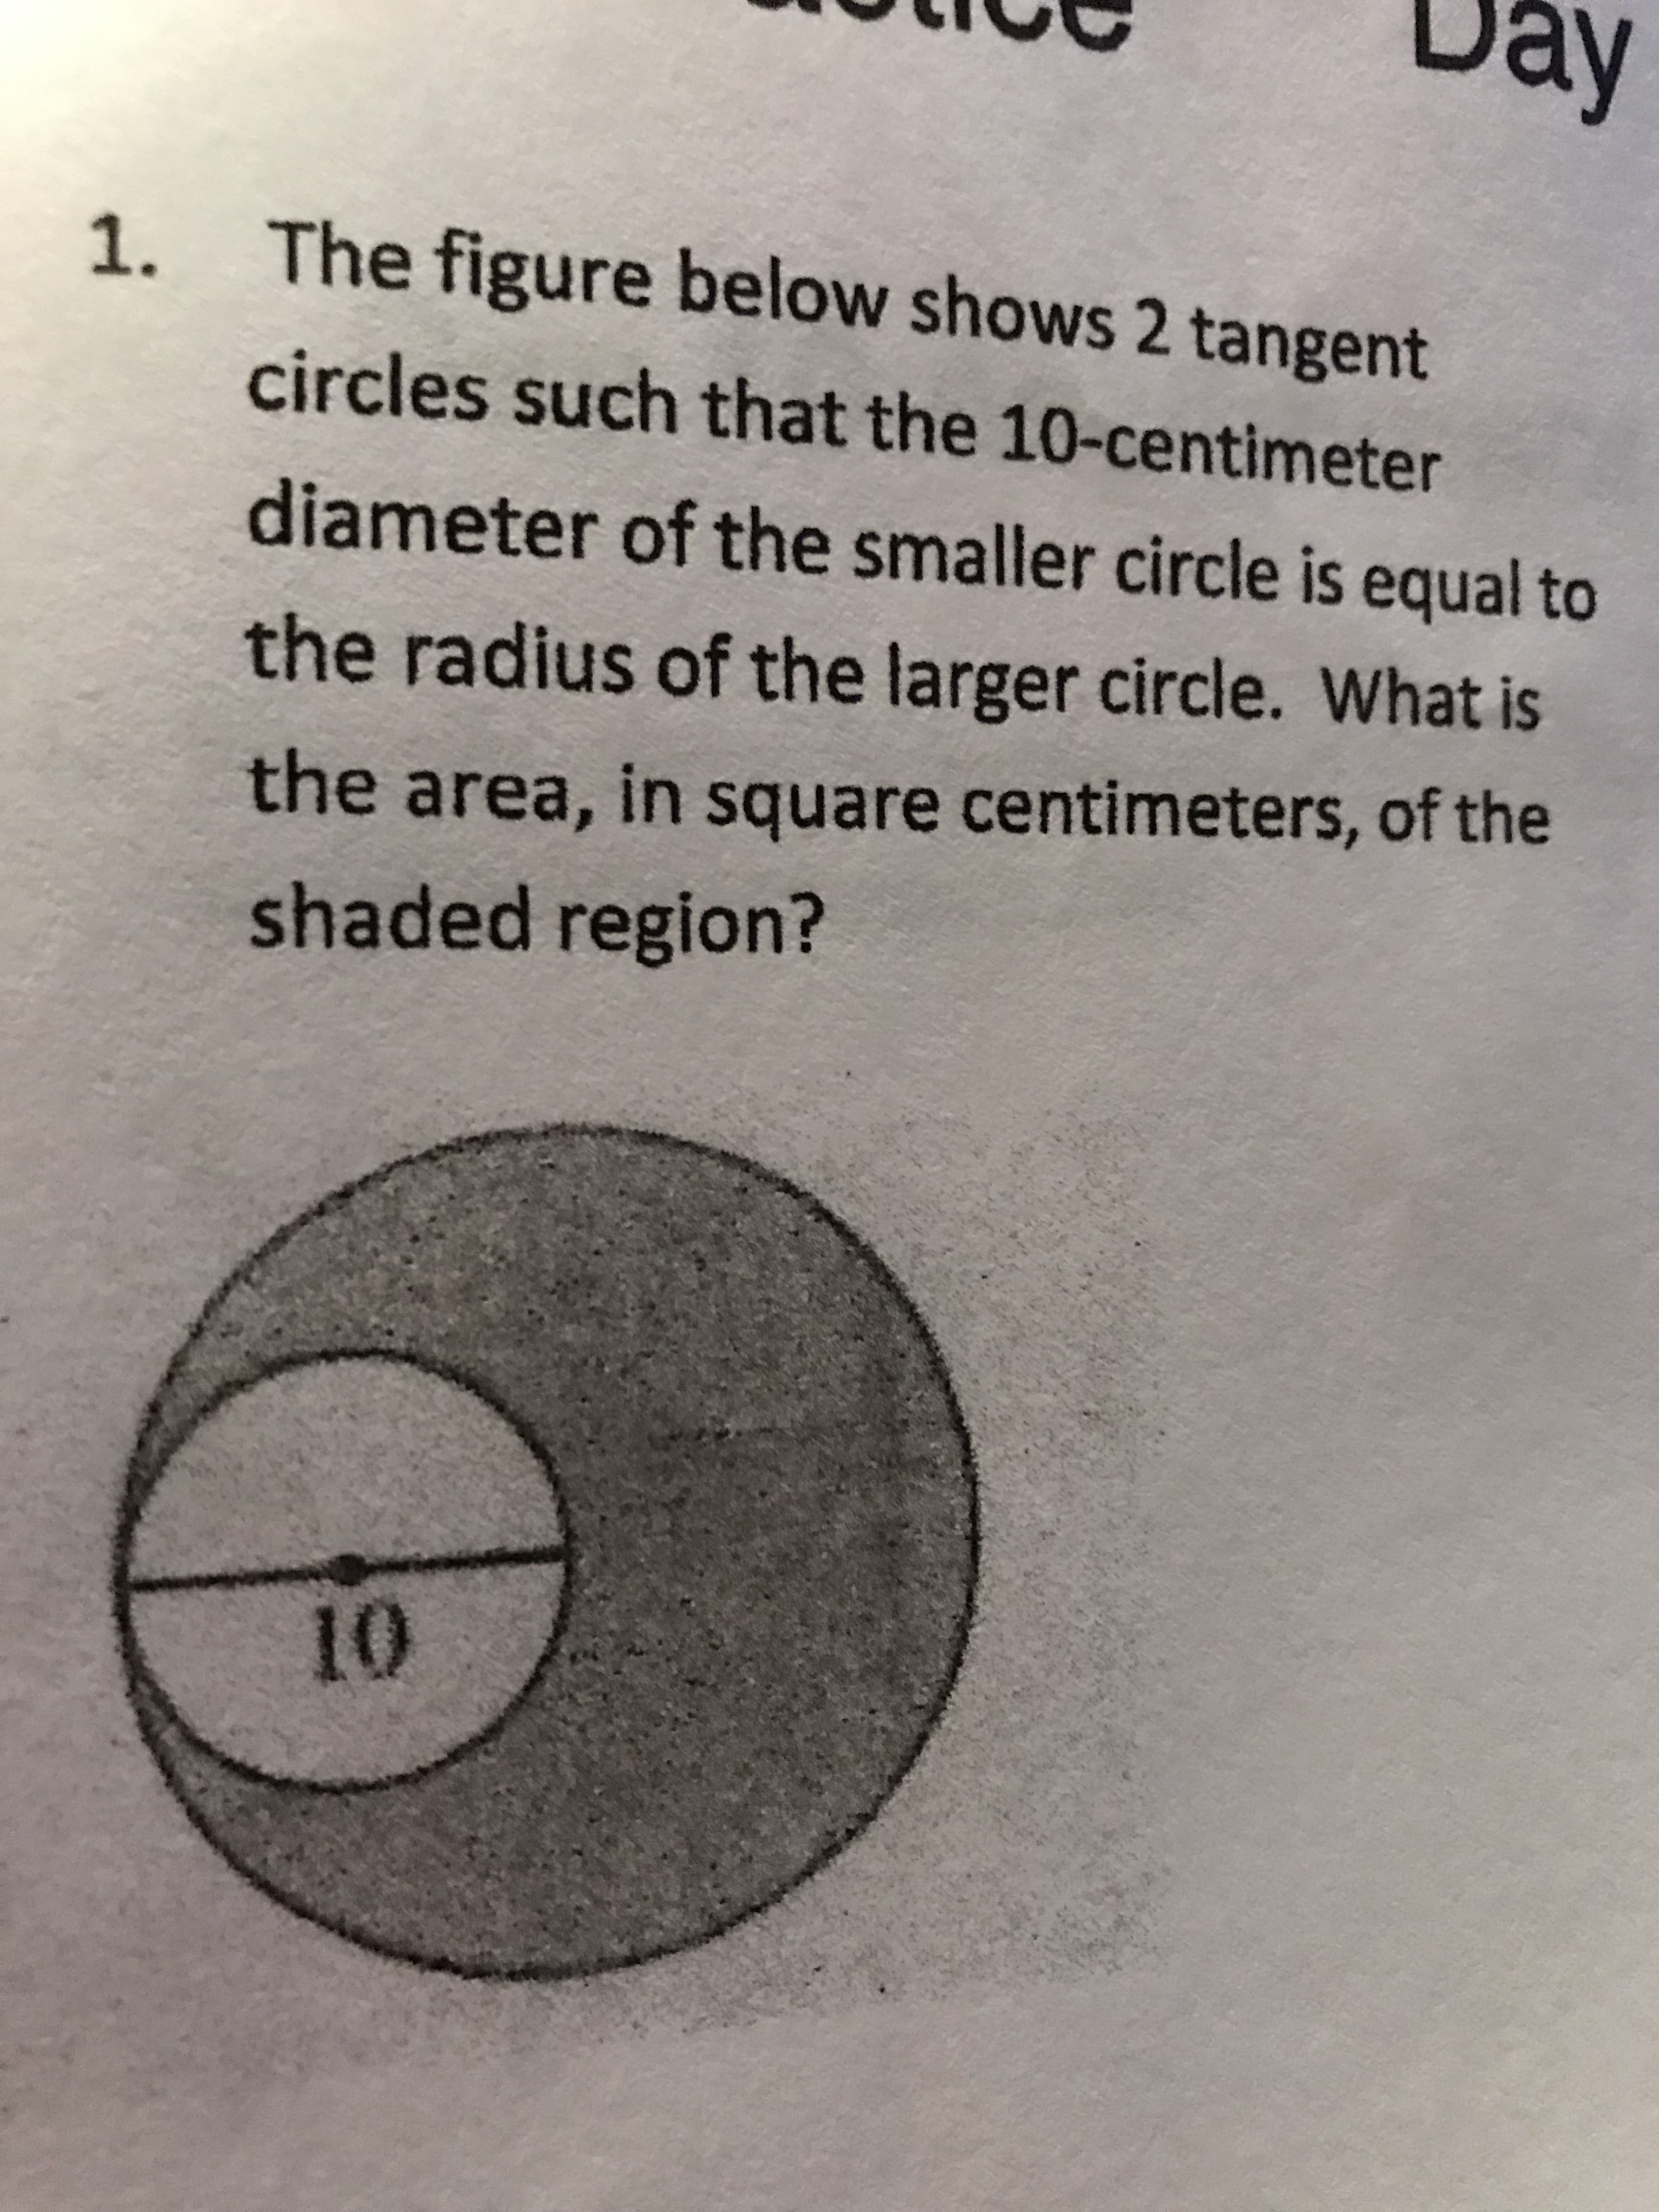 Day
The figure below shows 2 tangent
circles such that the 10-centimeter
diameter of the smaller circle is equal to
the radius of the larger circle. What is
the area, in square centimeters, of the
shaded region?
10
1.
